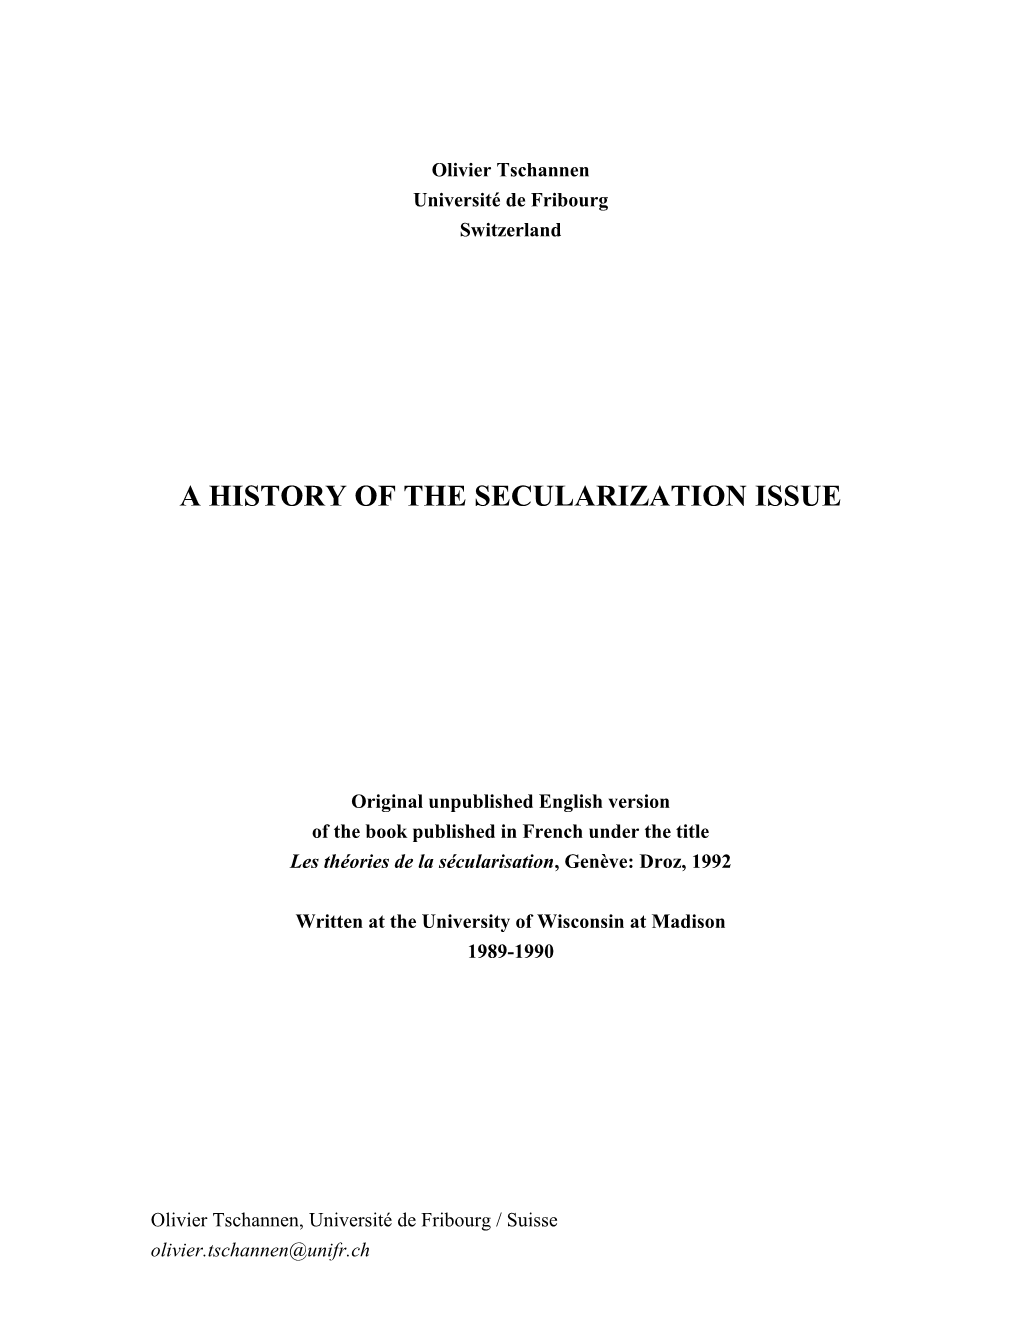 A History of the Secularization Issue